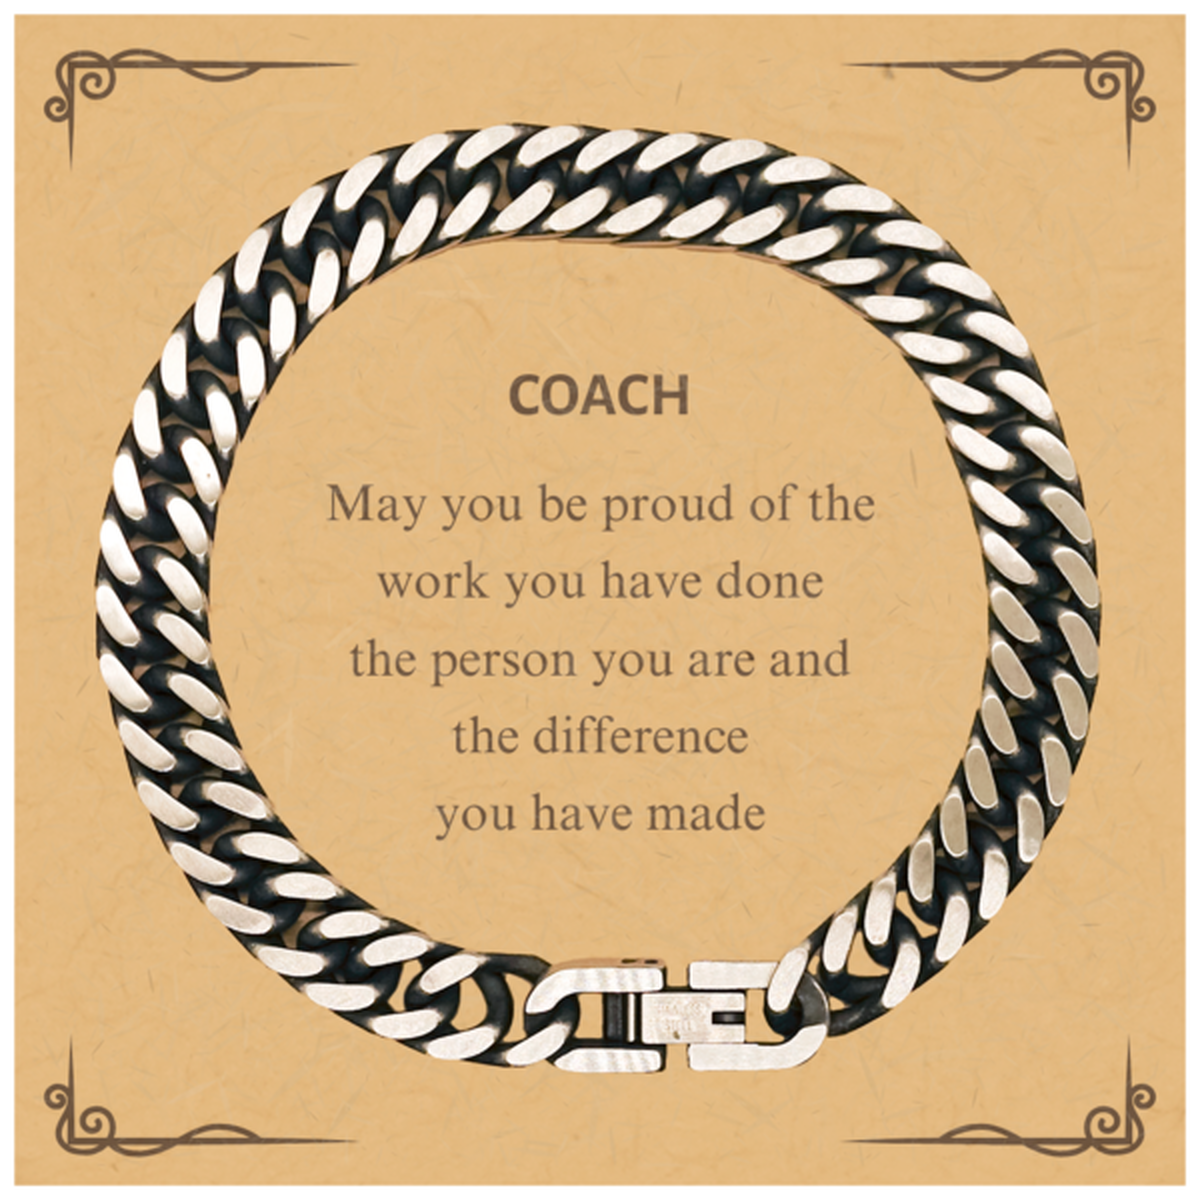 Coach May you be proud of the work you have done, Retirement Coach Cuban Link Chain Bracelet for Colleague Appreciation Gifts Amazing for Coach